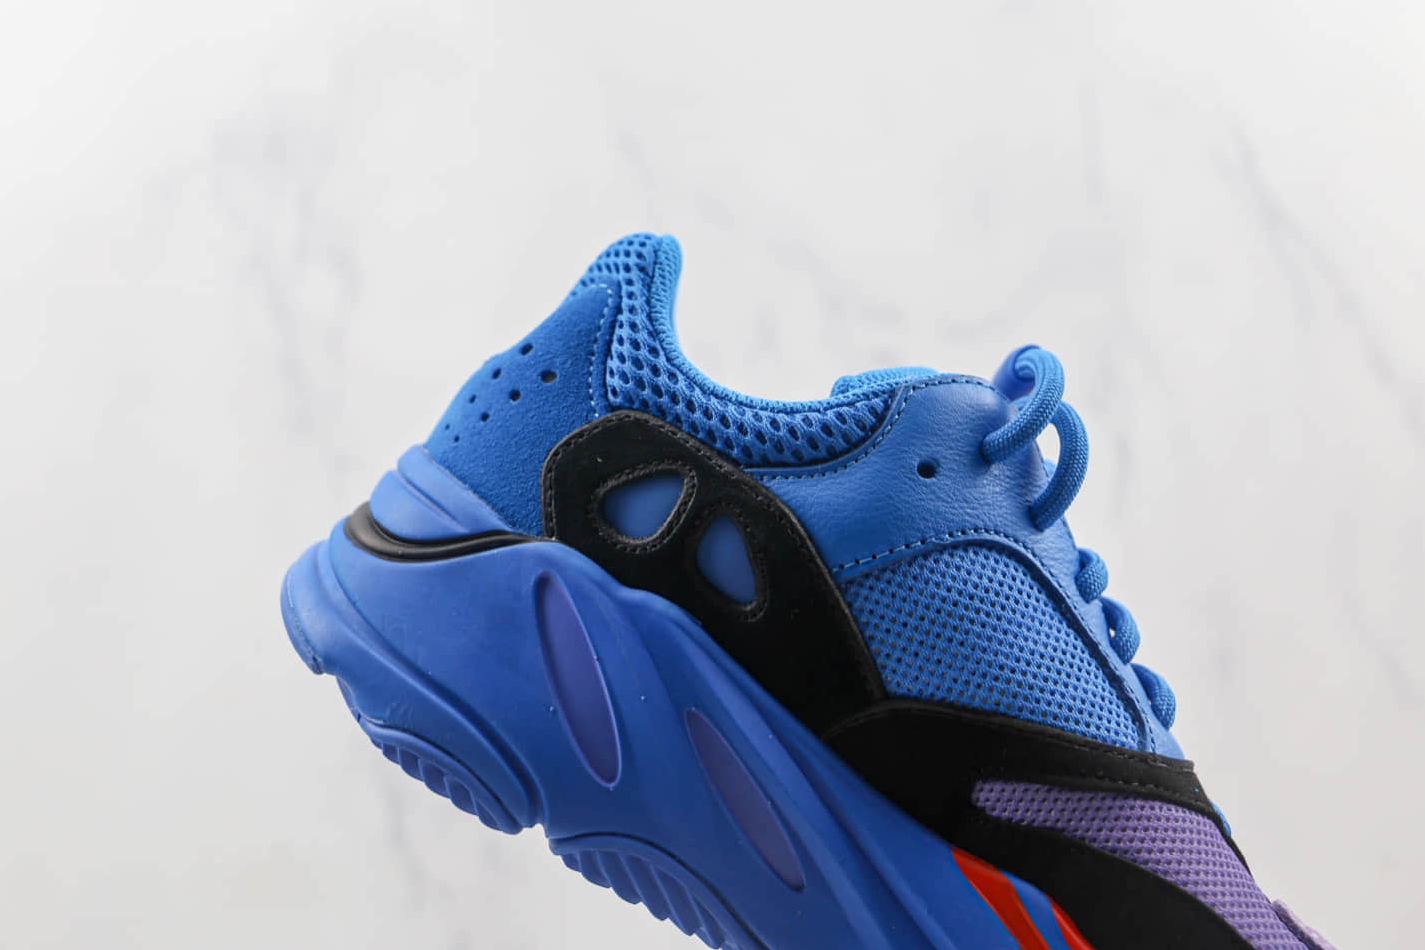 Adidas Yeezy Boost 700 'Hi-Res Blue' - Shop Now!